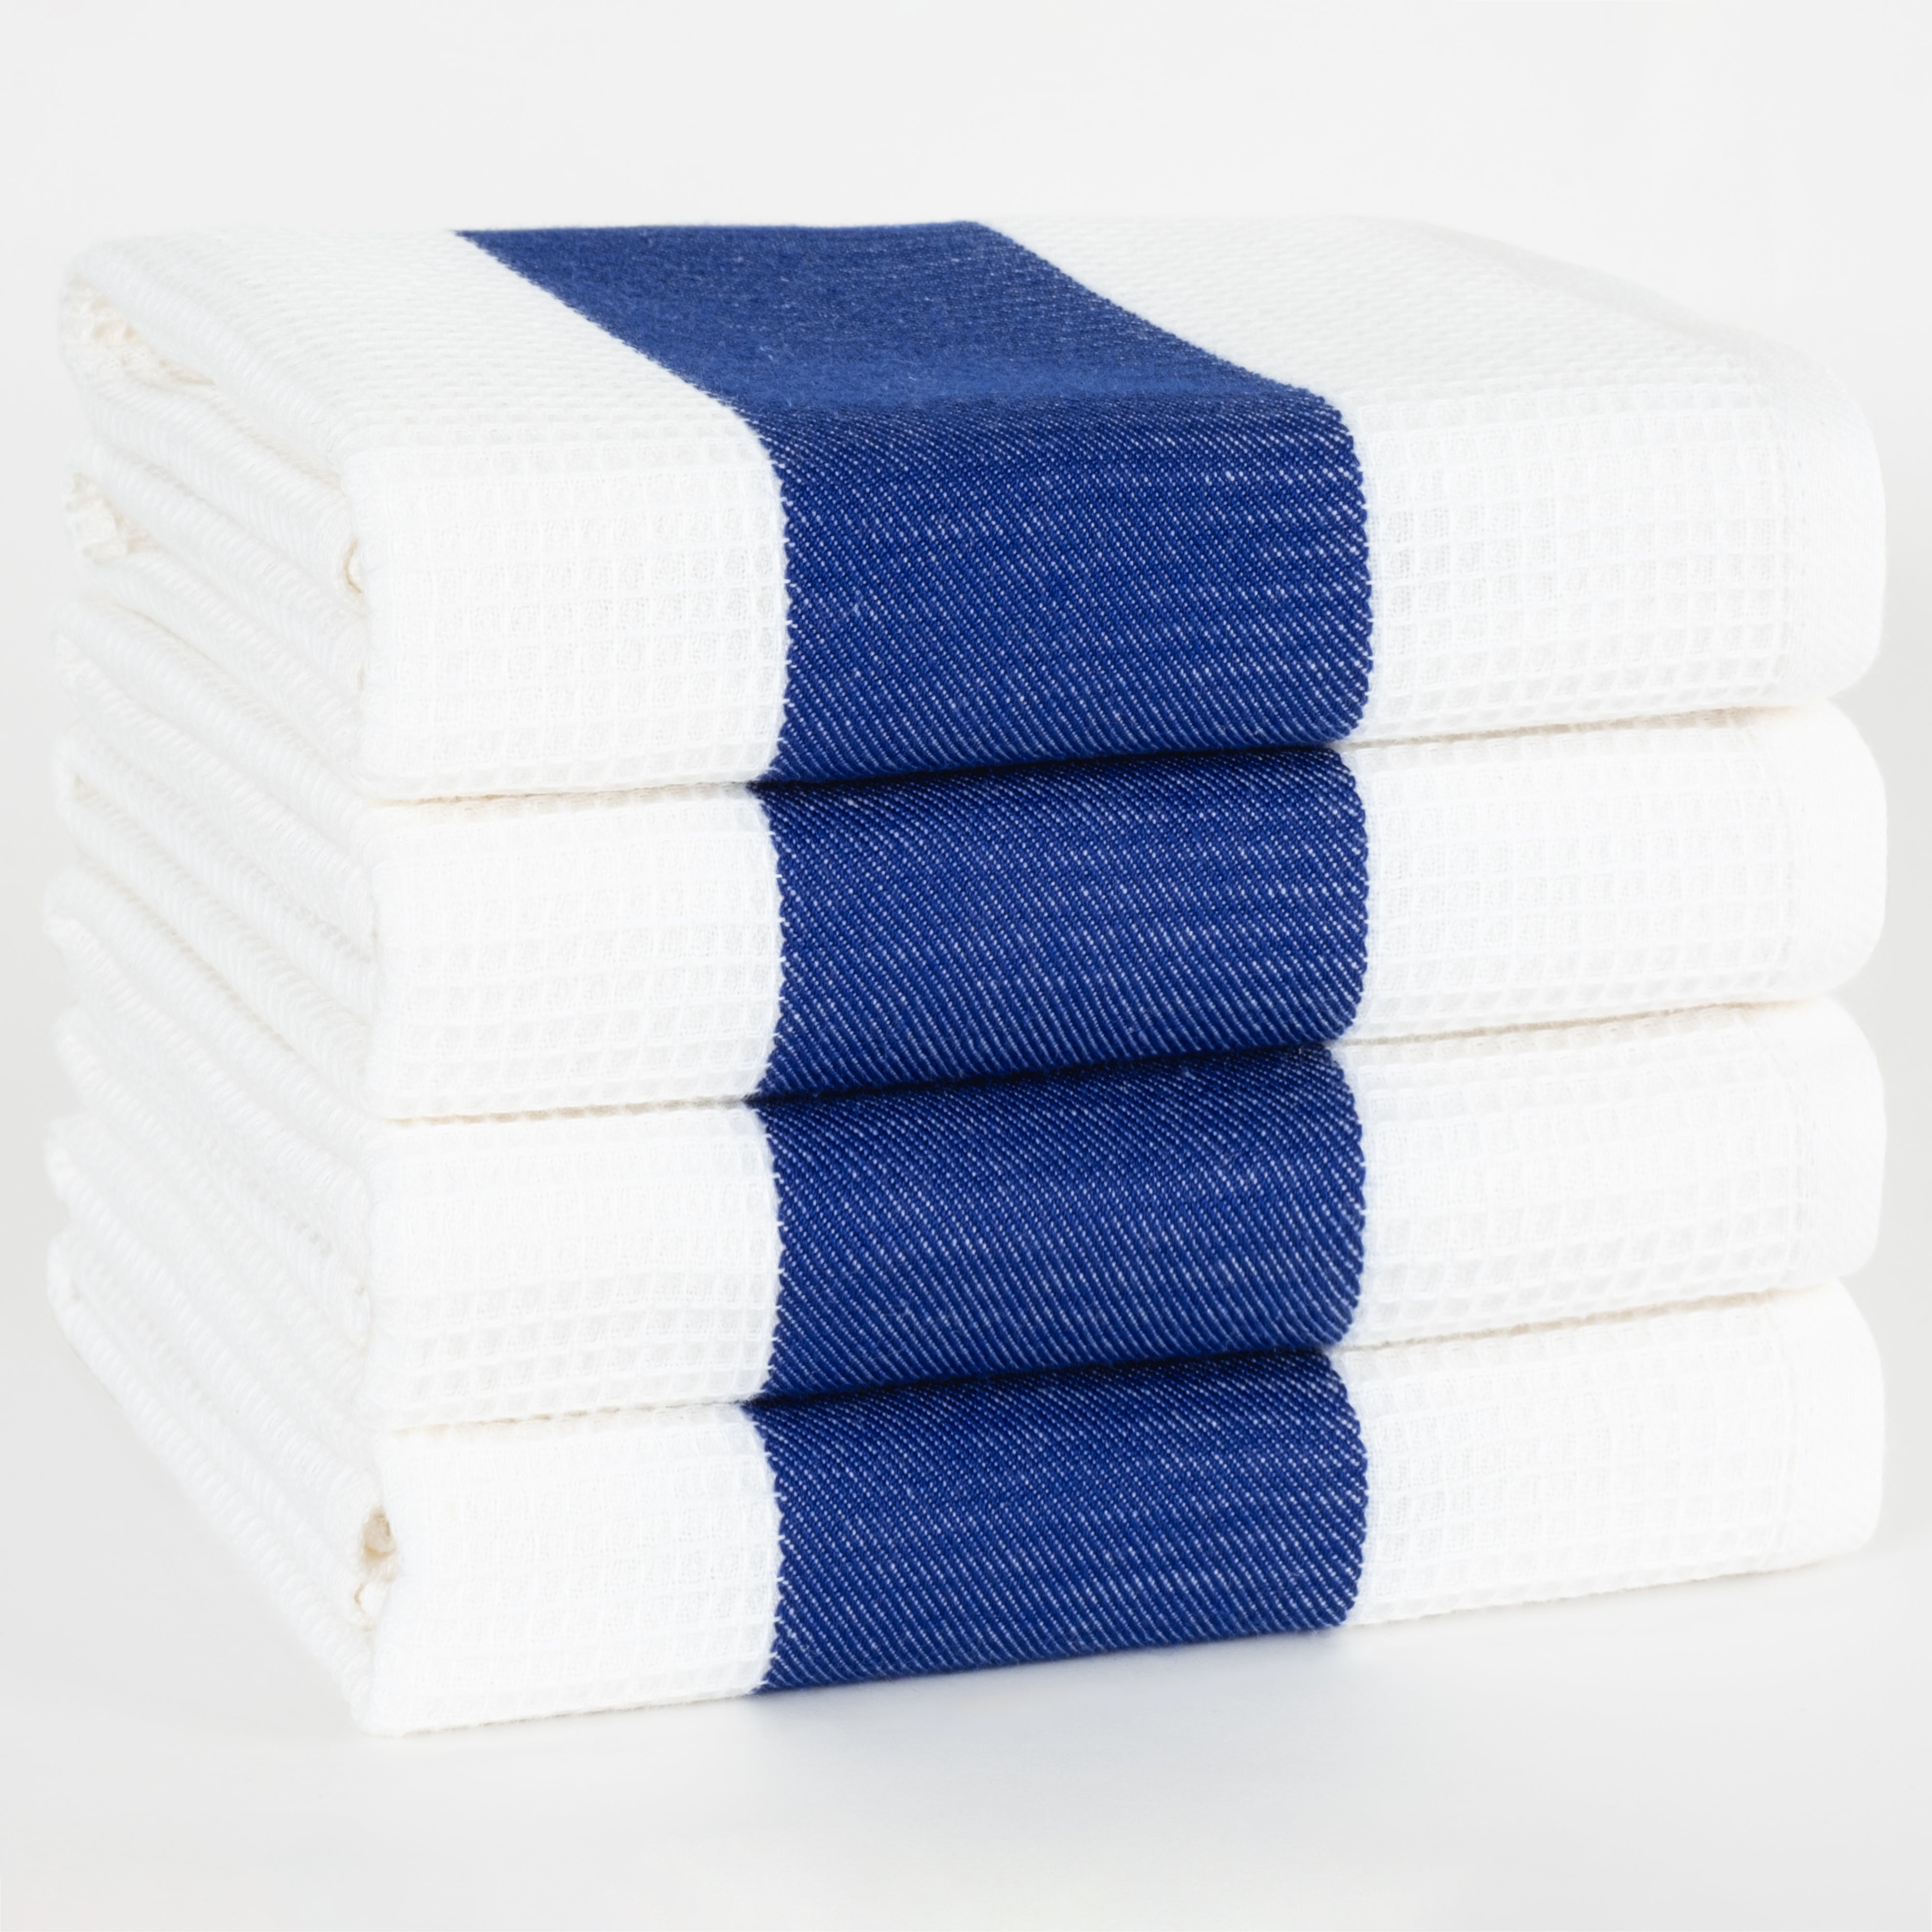 American Soft Linen 4 Packed Dish Towels, 100% Cotton Dish Cloths for Kitchen navy-blue-1